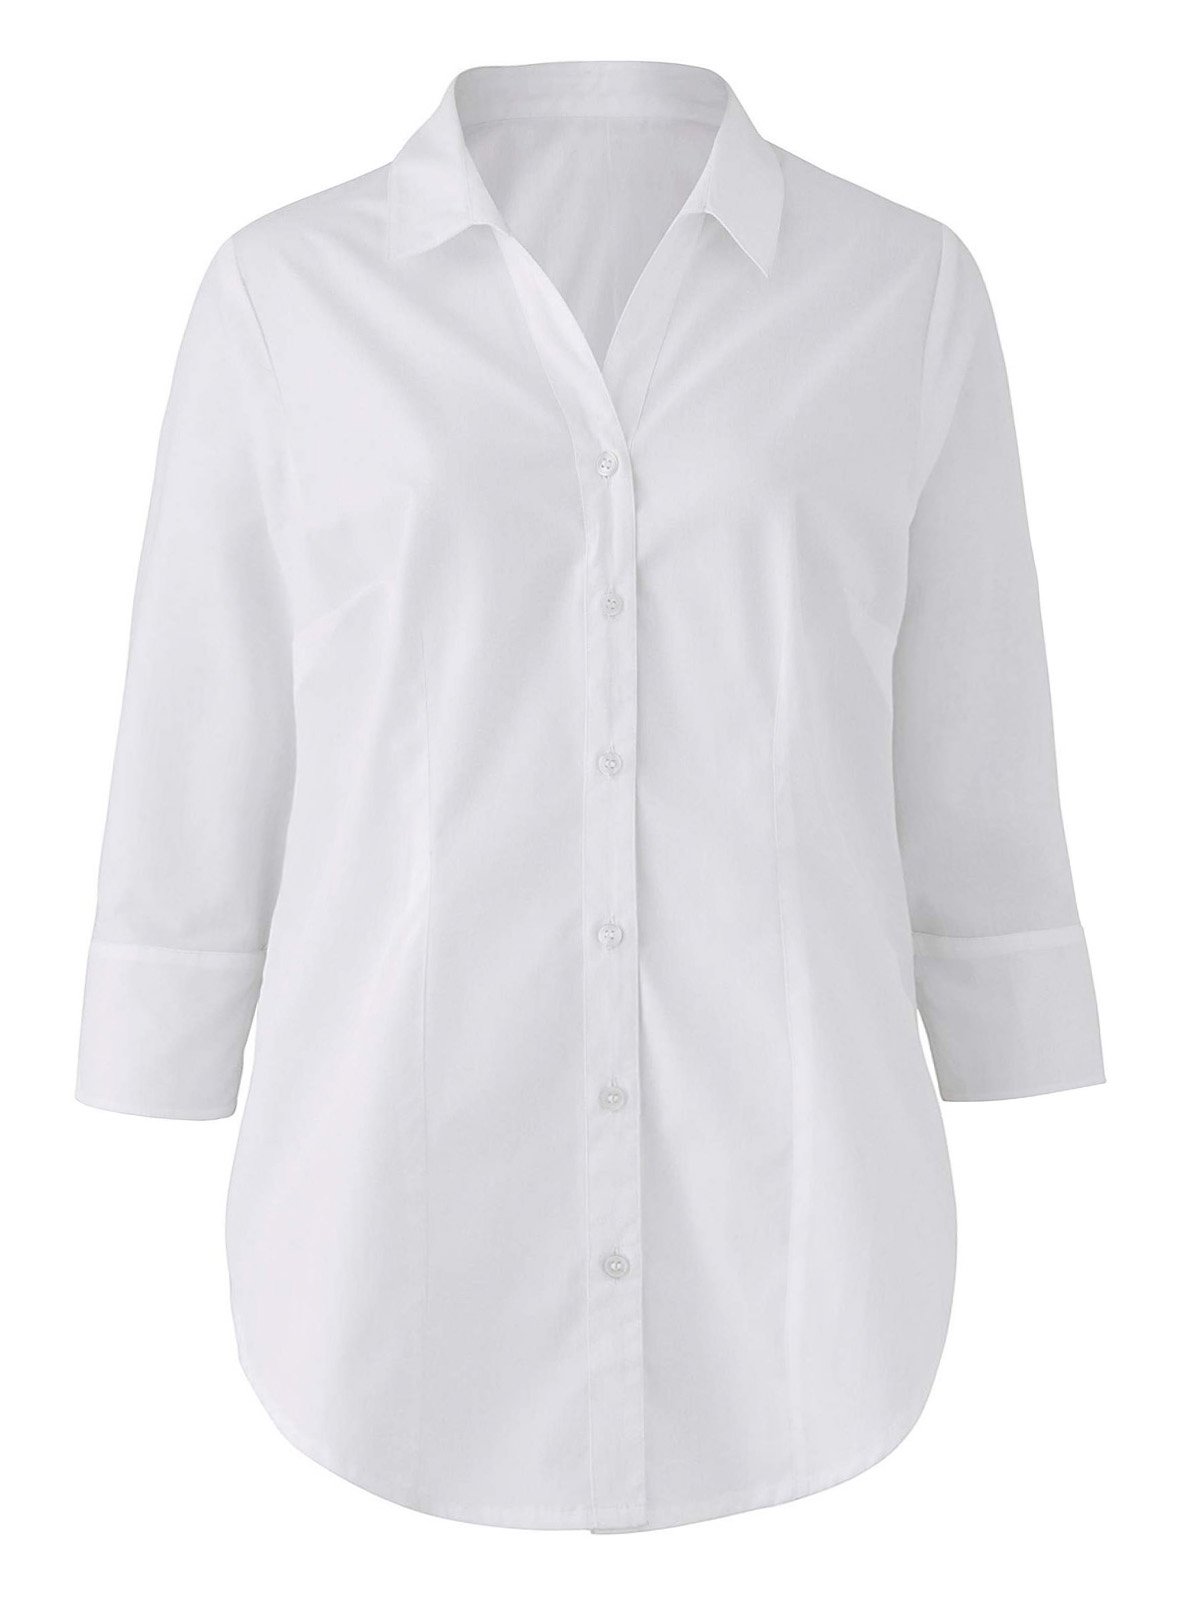 Capsule - - Capsule WHITE Pure Cotton 3/4 Sleeve Shirt - Plus Size 16 to 26